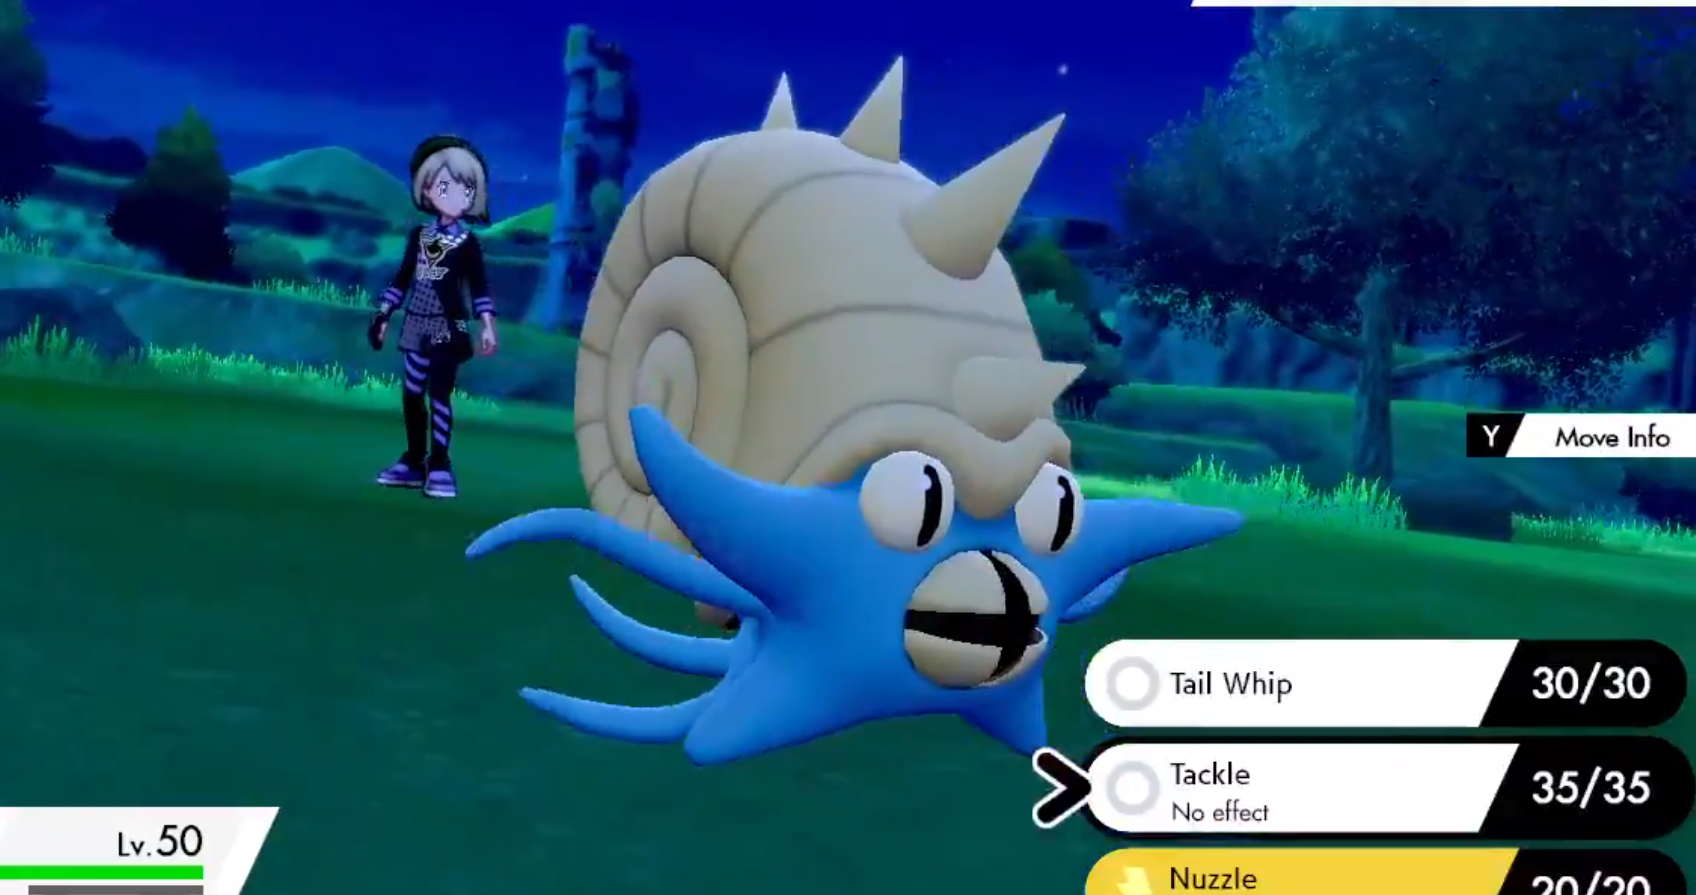 Pokémon Sword And Shield Modders Already Inserting Missing